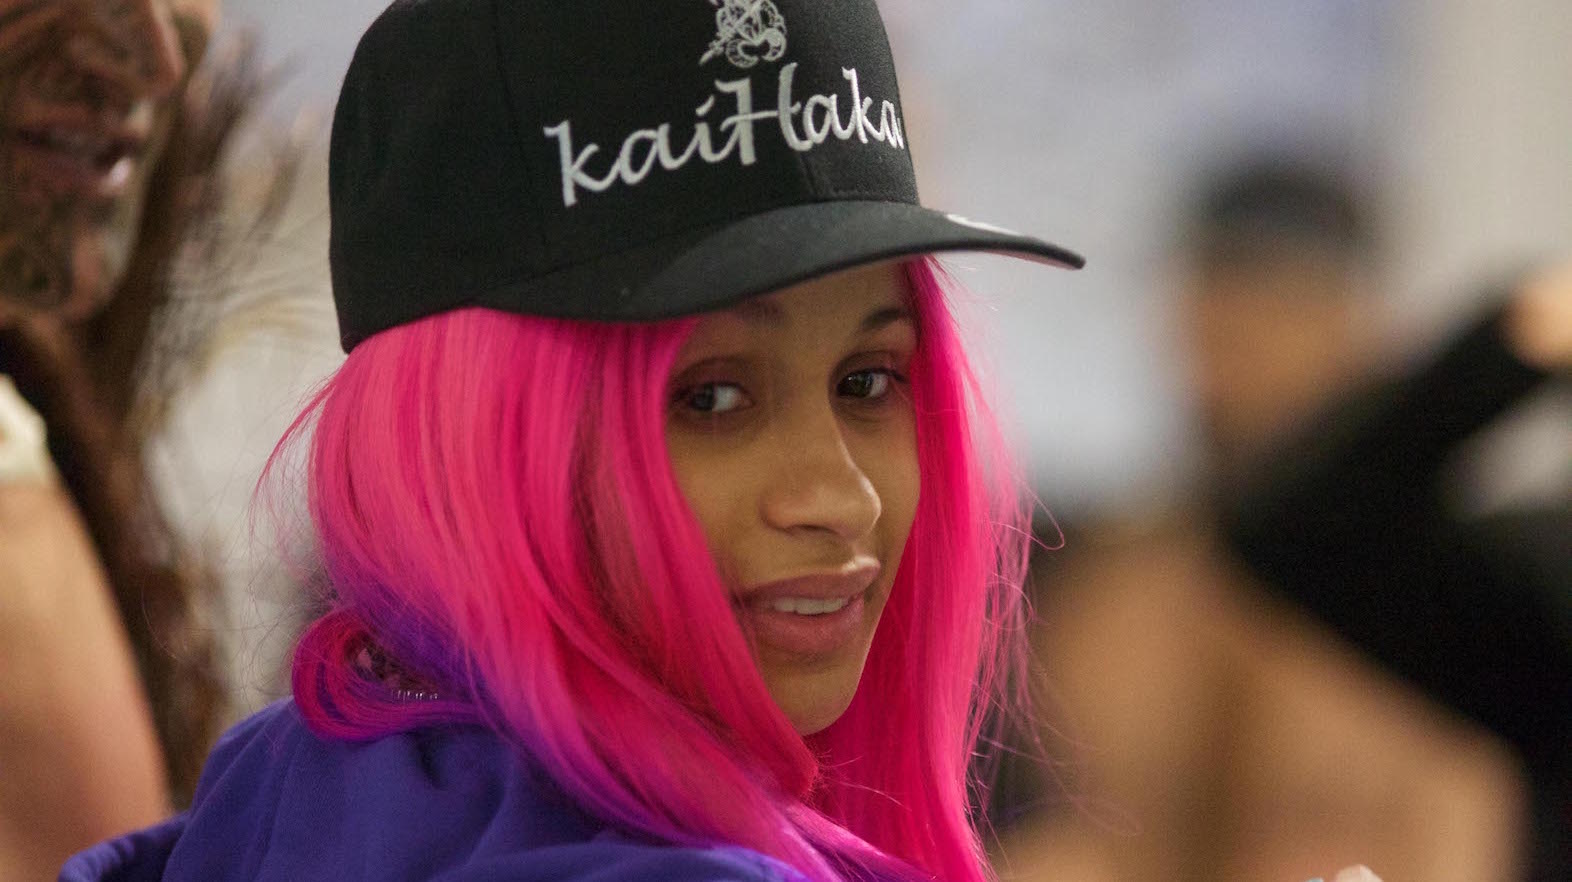 Cardi B's Pink and Purple Hair Looks Amazing on Her